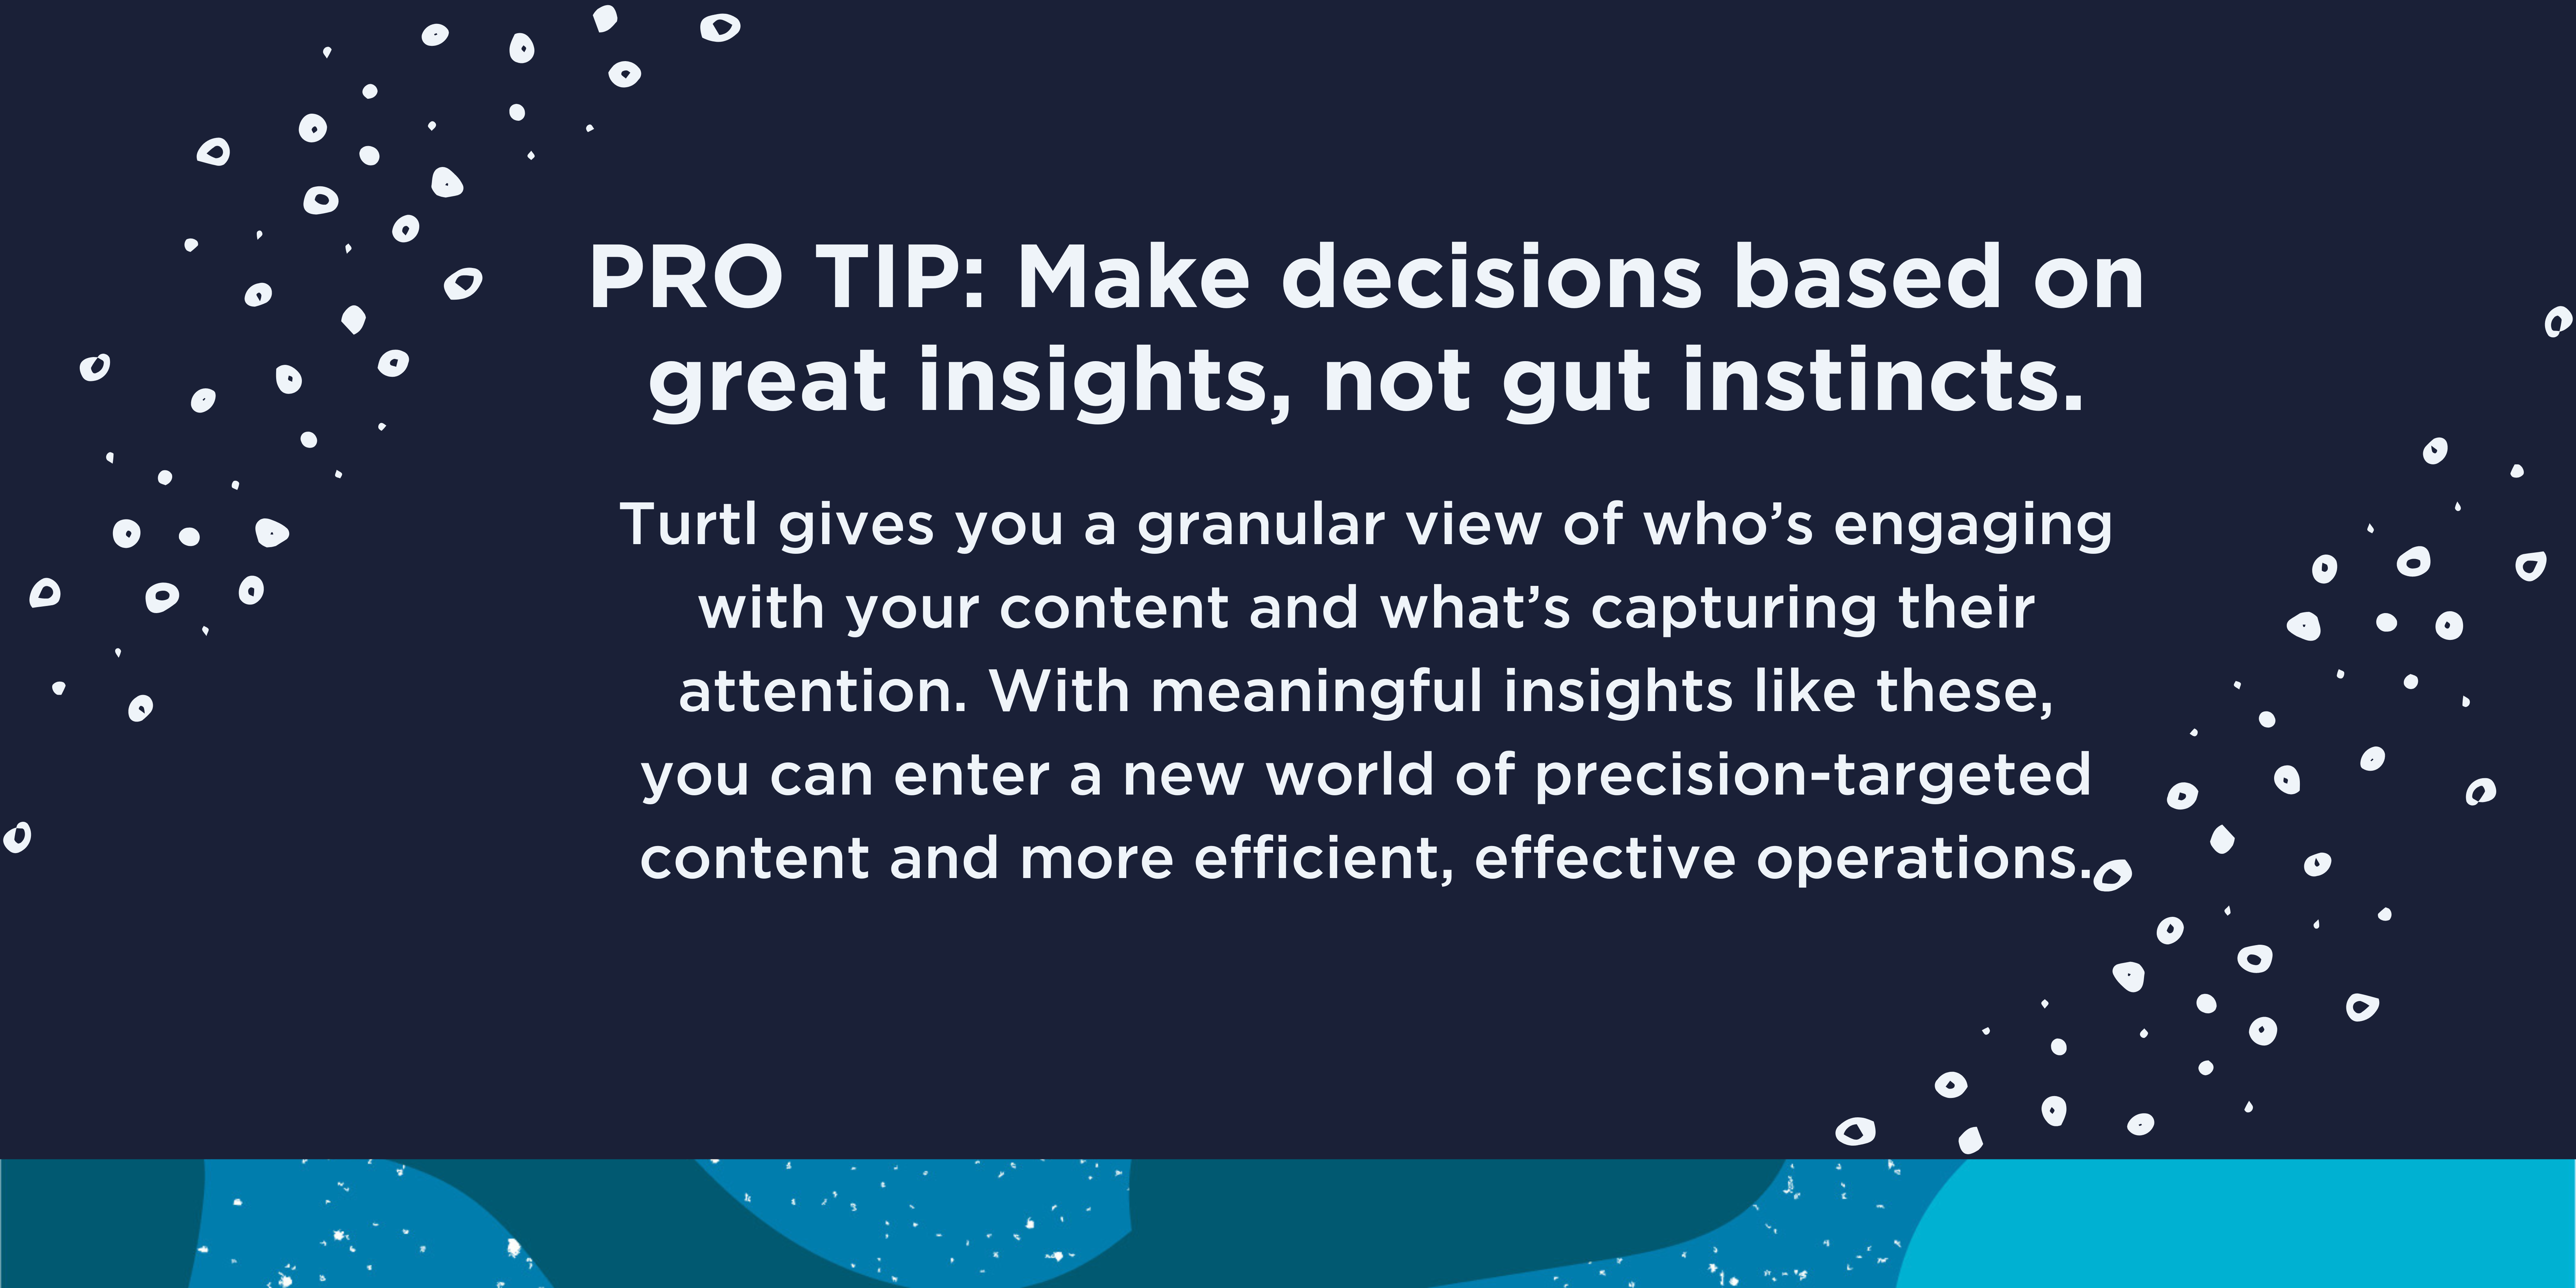 PRO TIP: Make decisions based on great insights, not gut instincts.